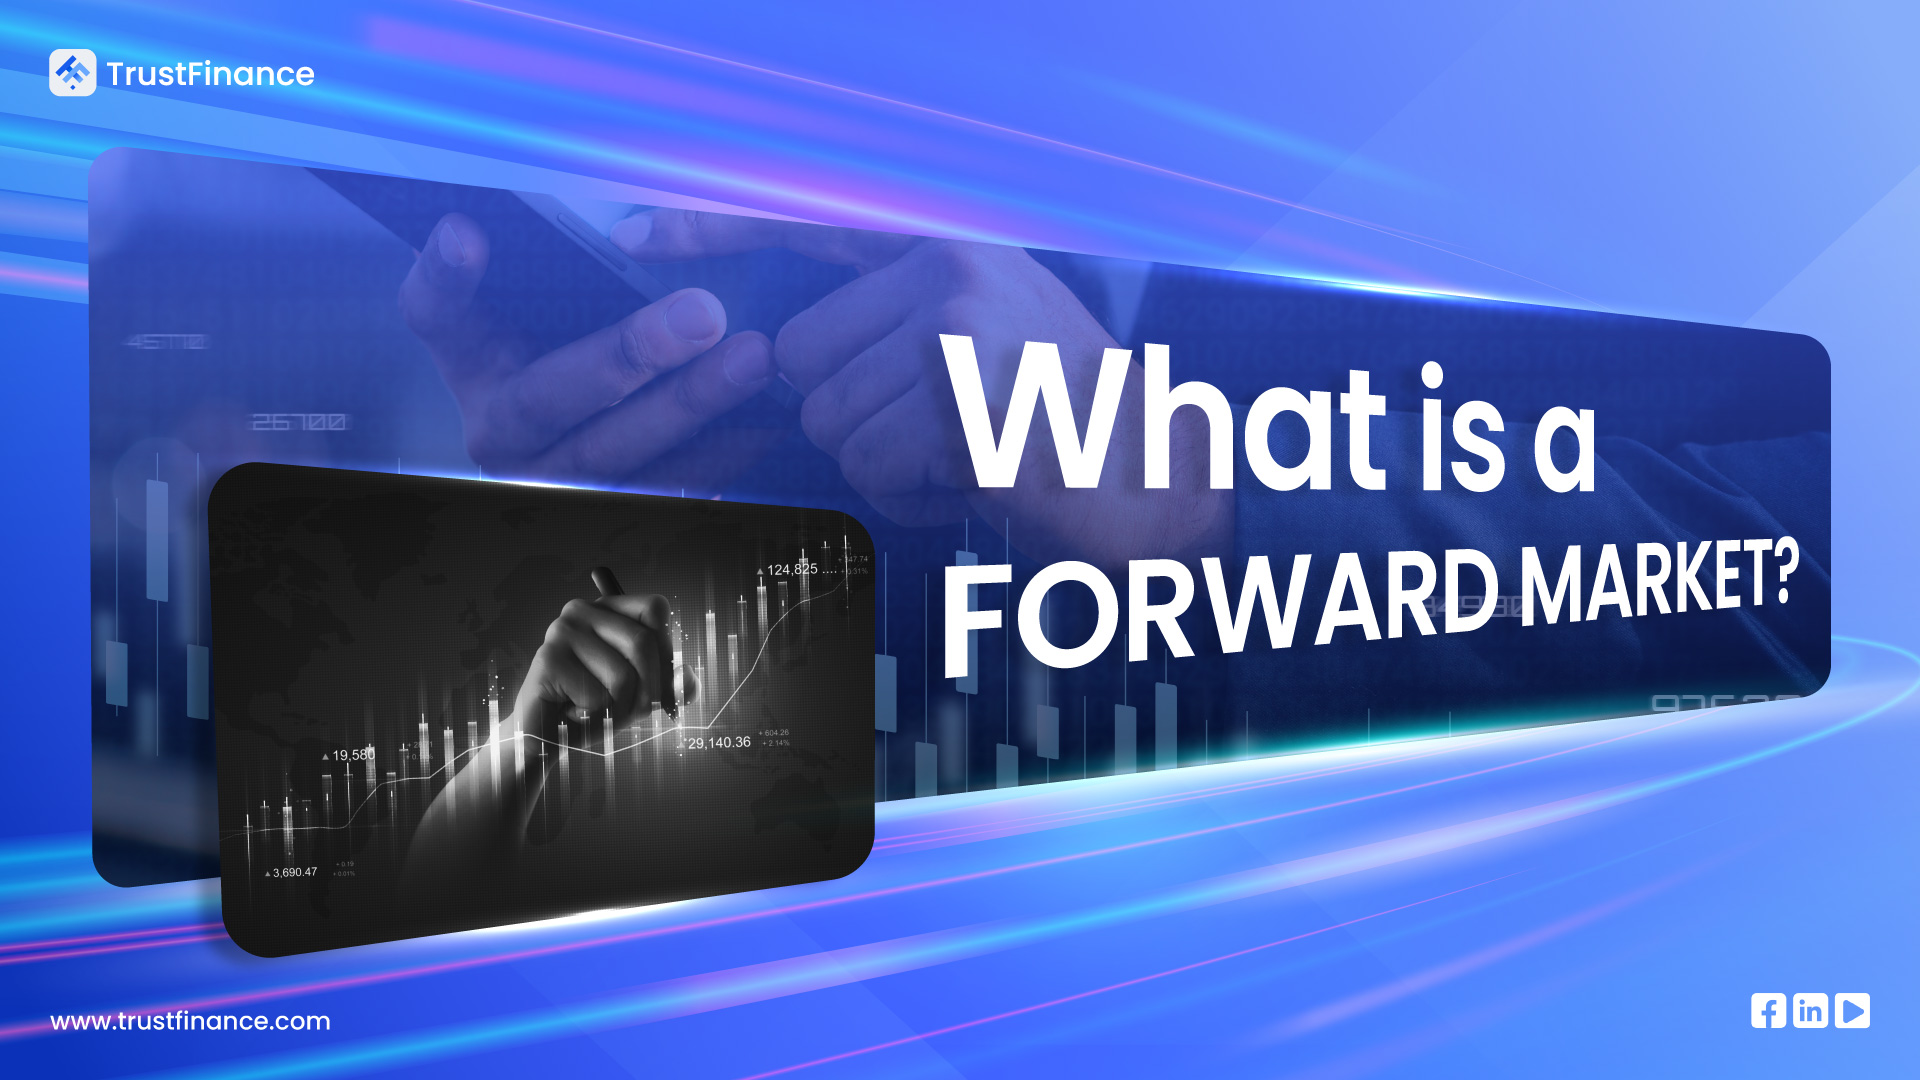 What is a Forward Market?